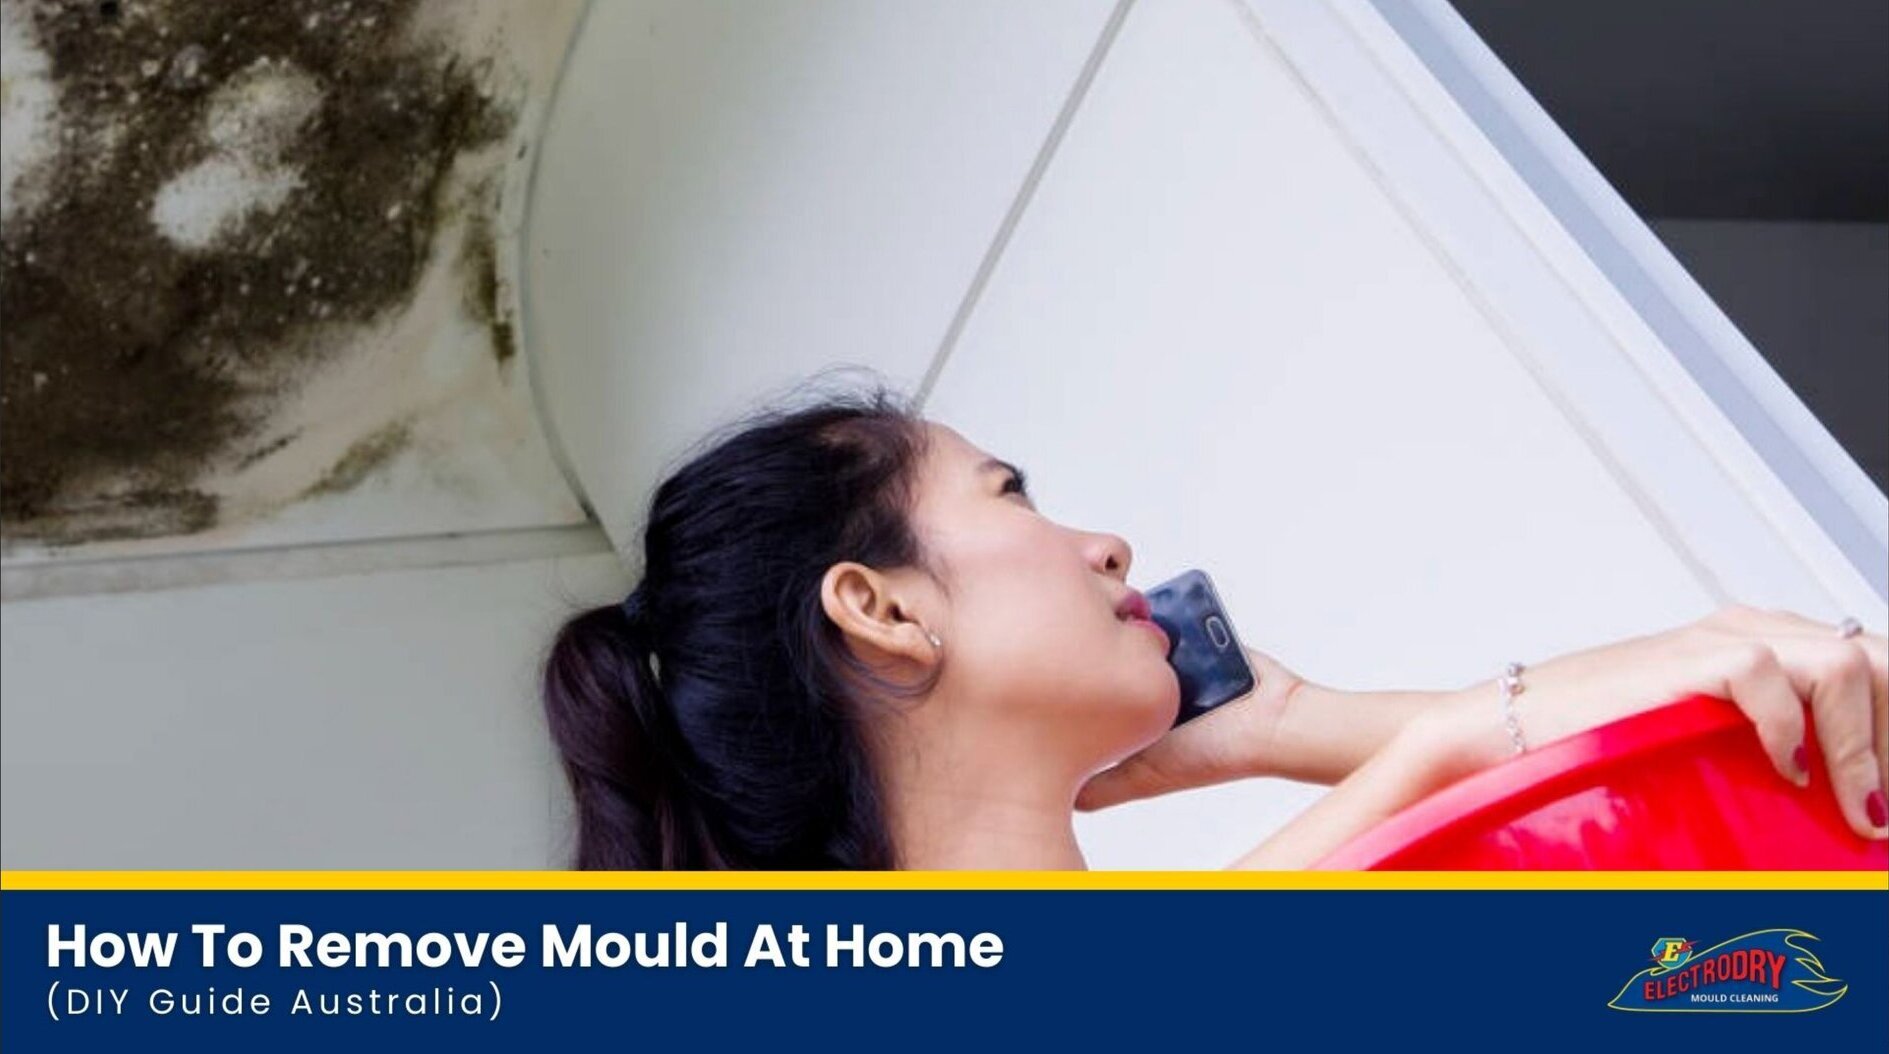 How To Remove Mould At Home (DIY Guide Australia)